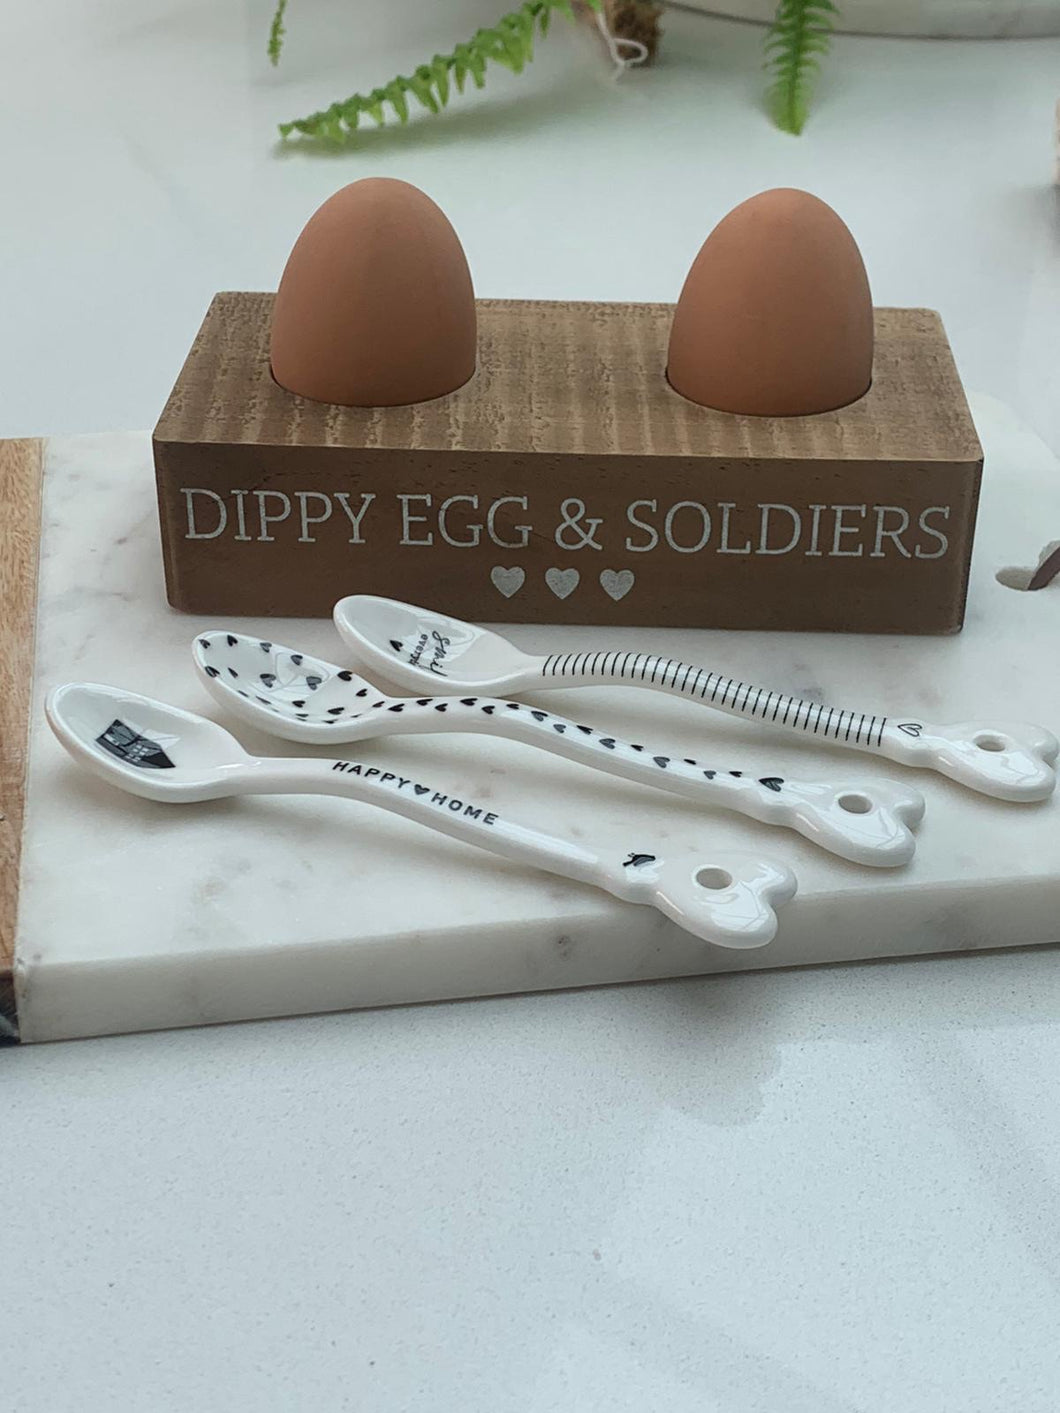 Dippy Egg & Soldiers Holder